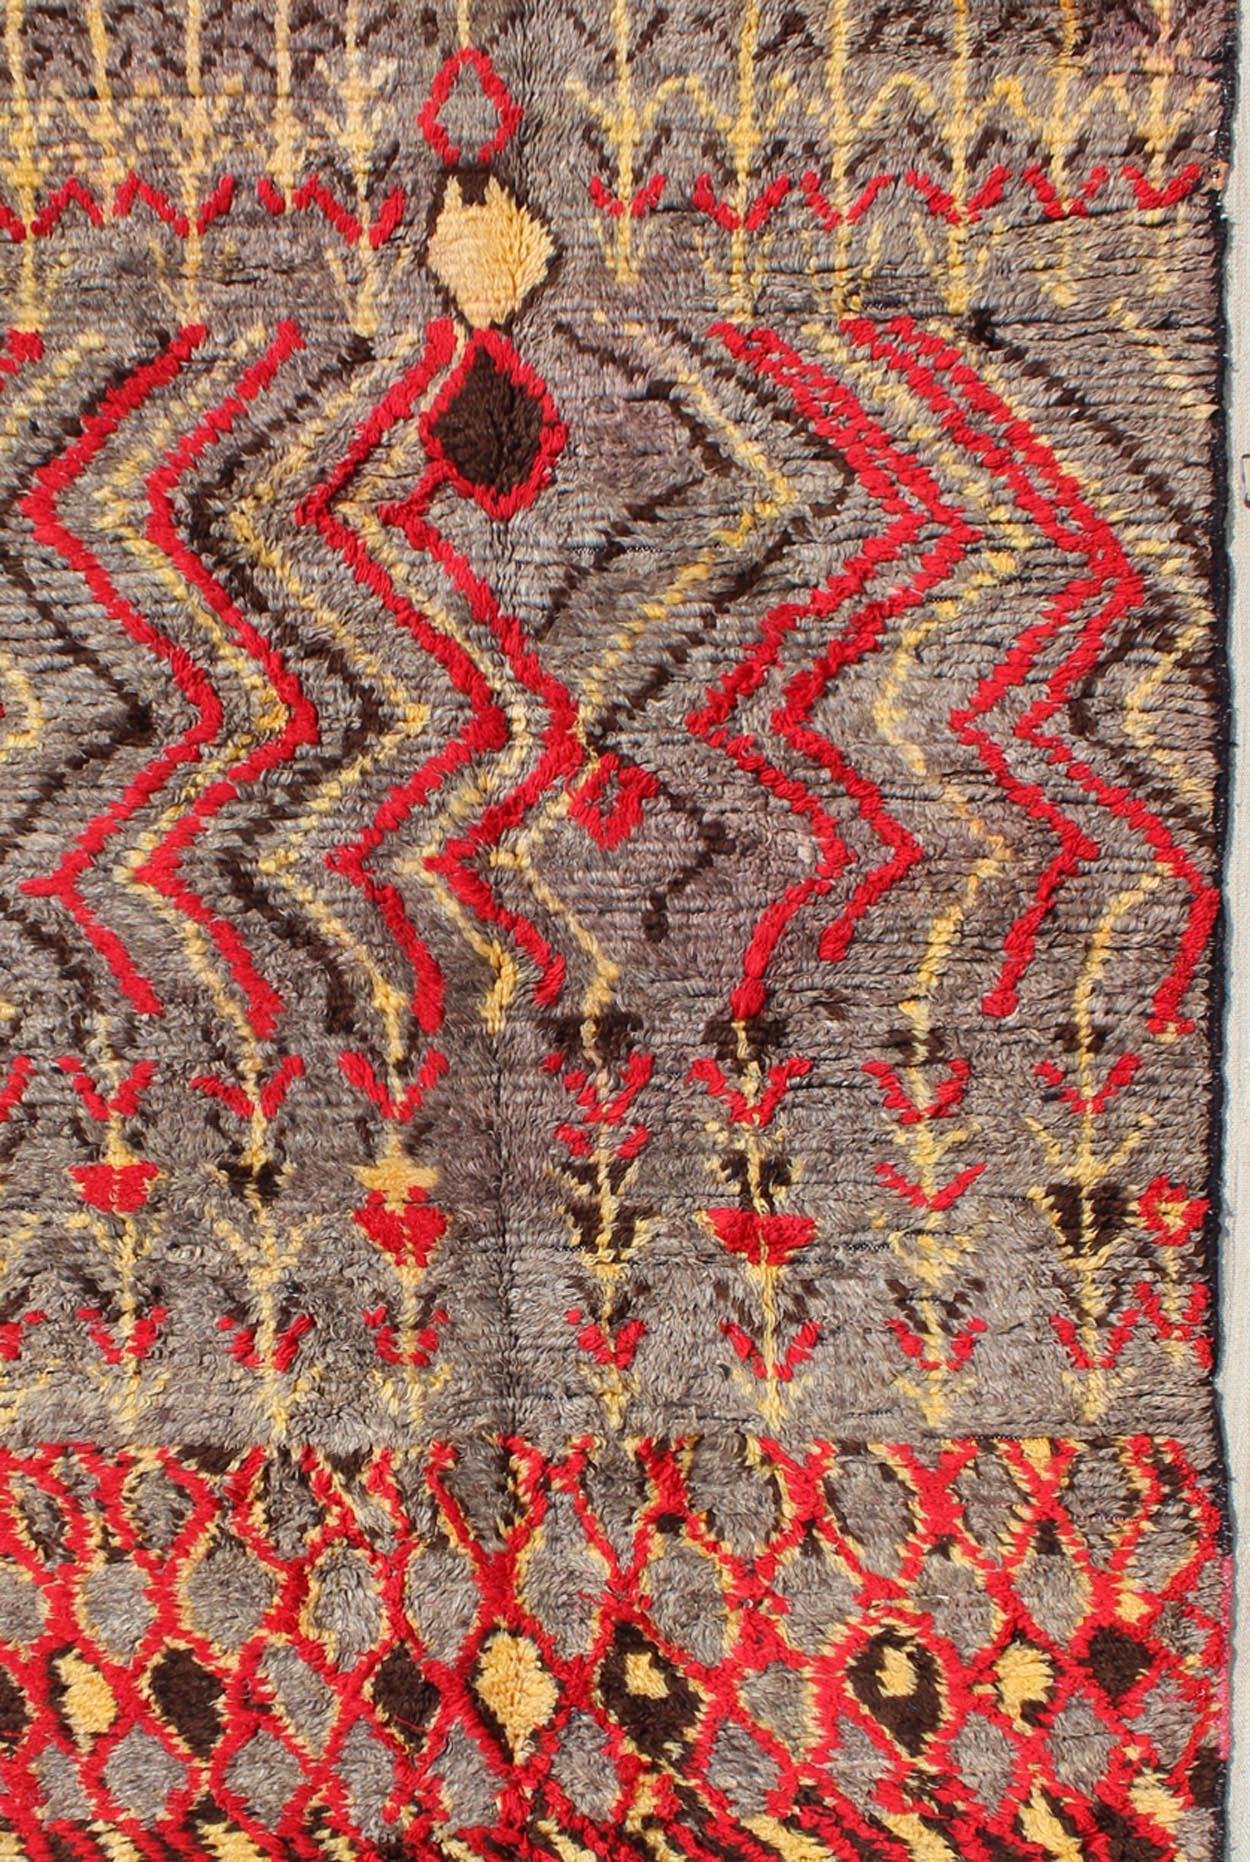 Midcentury Moroccan rug with charcoal, red, yellow, and gray. Keivan Woven Arts rug/BDS-20768, country of origin / type: Morocco / Tribal, circa mid-20th century

This wonderful vintage Moroccan rug (circa mid-20th century) features shades of red,